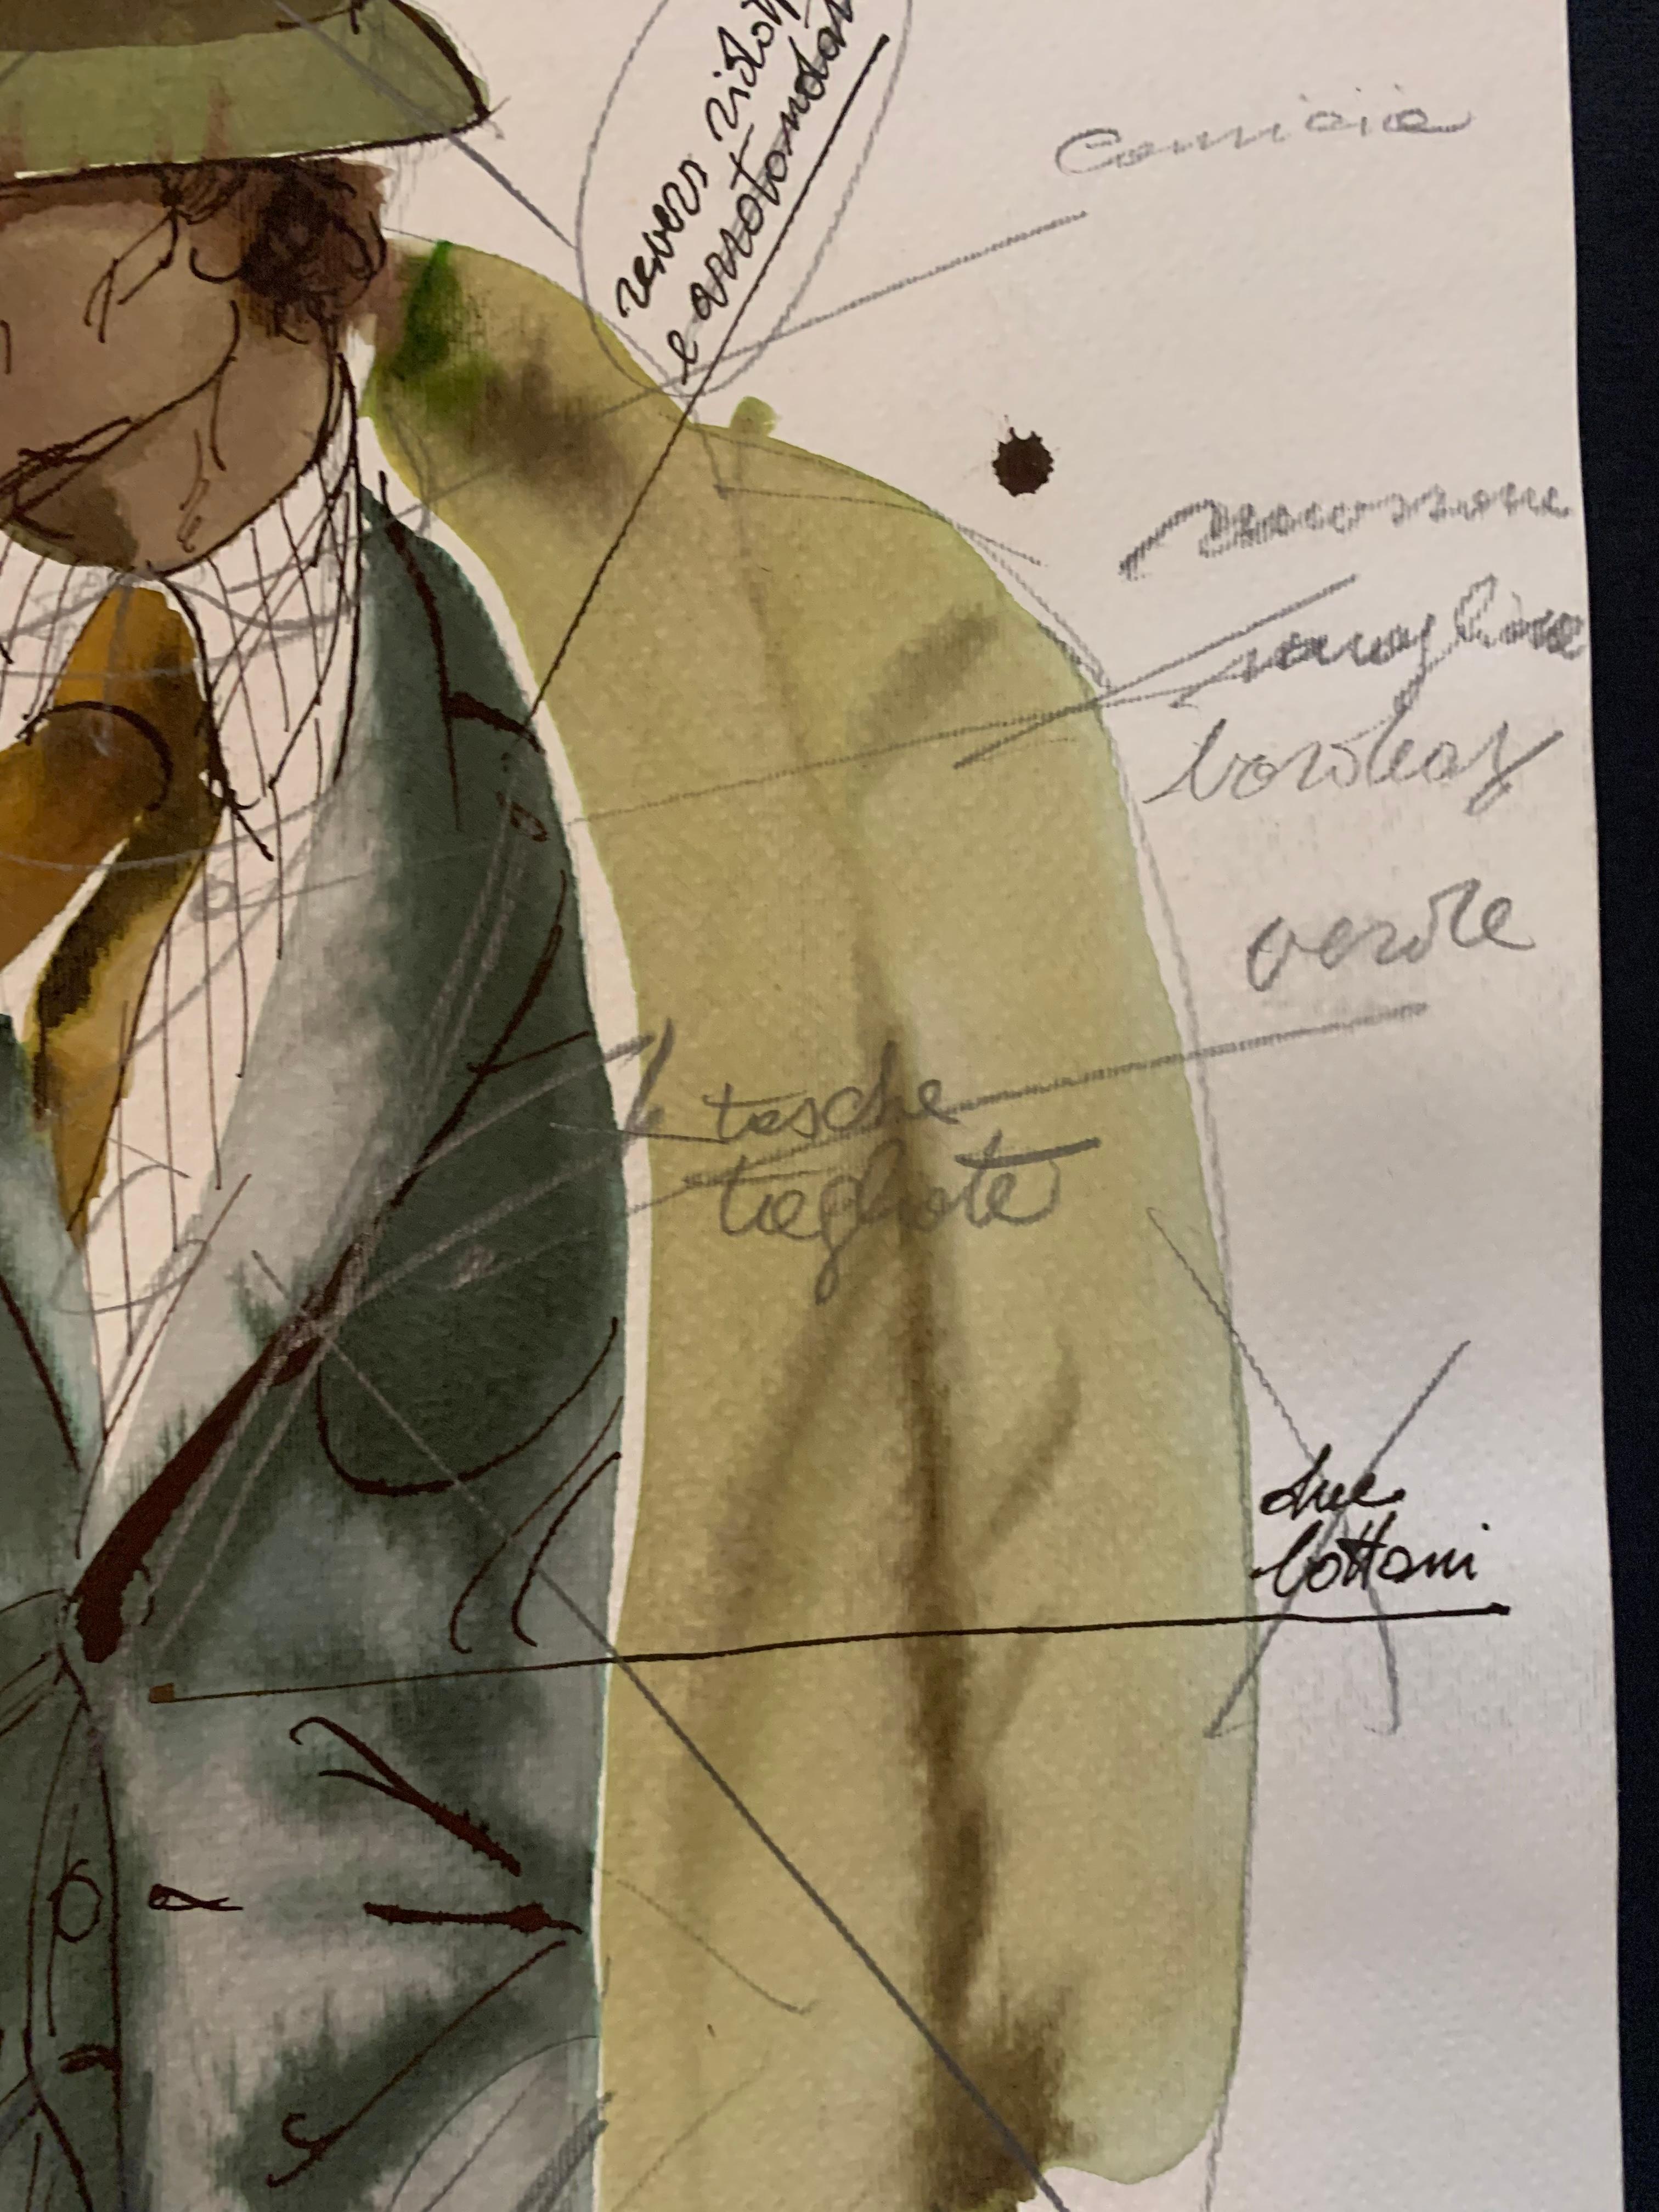 Project for advertising of a Pret-a-porter company for men. Facis.
Work by Marco Silombria (Savona, 1936 - Albissola, 2014).
Mixed media: drawing, watercolor, pen, applied to black paper support
It has numerous notes on the sides indicating the